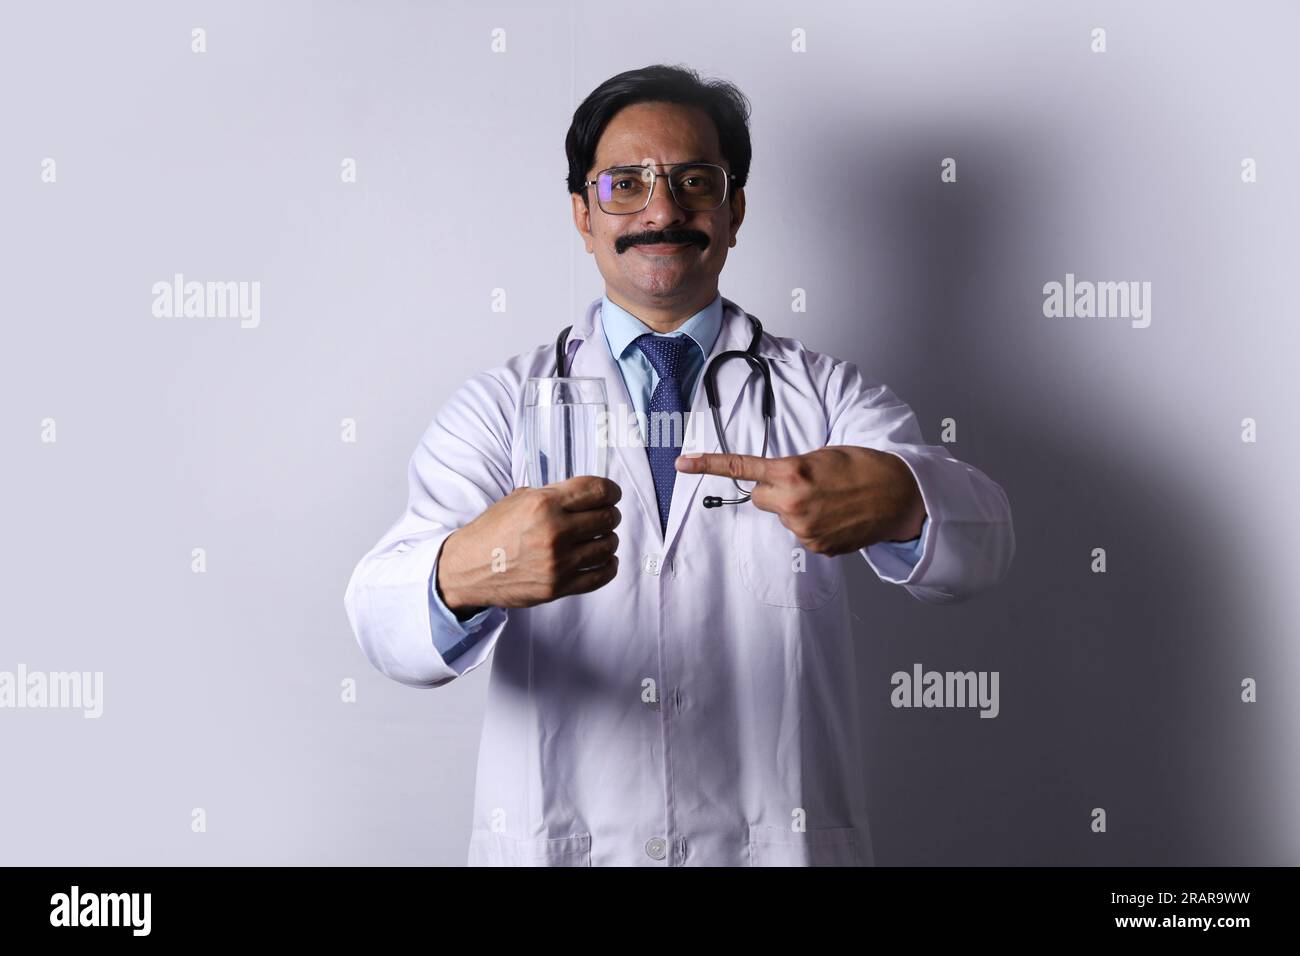 Doctor recommending nutritional diets and drinks for a better health. Stock Photo